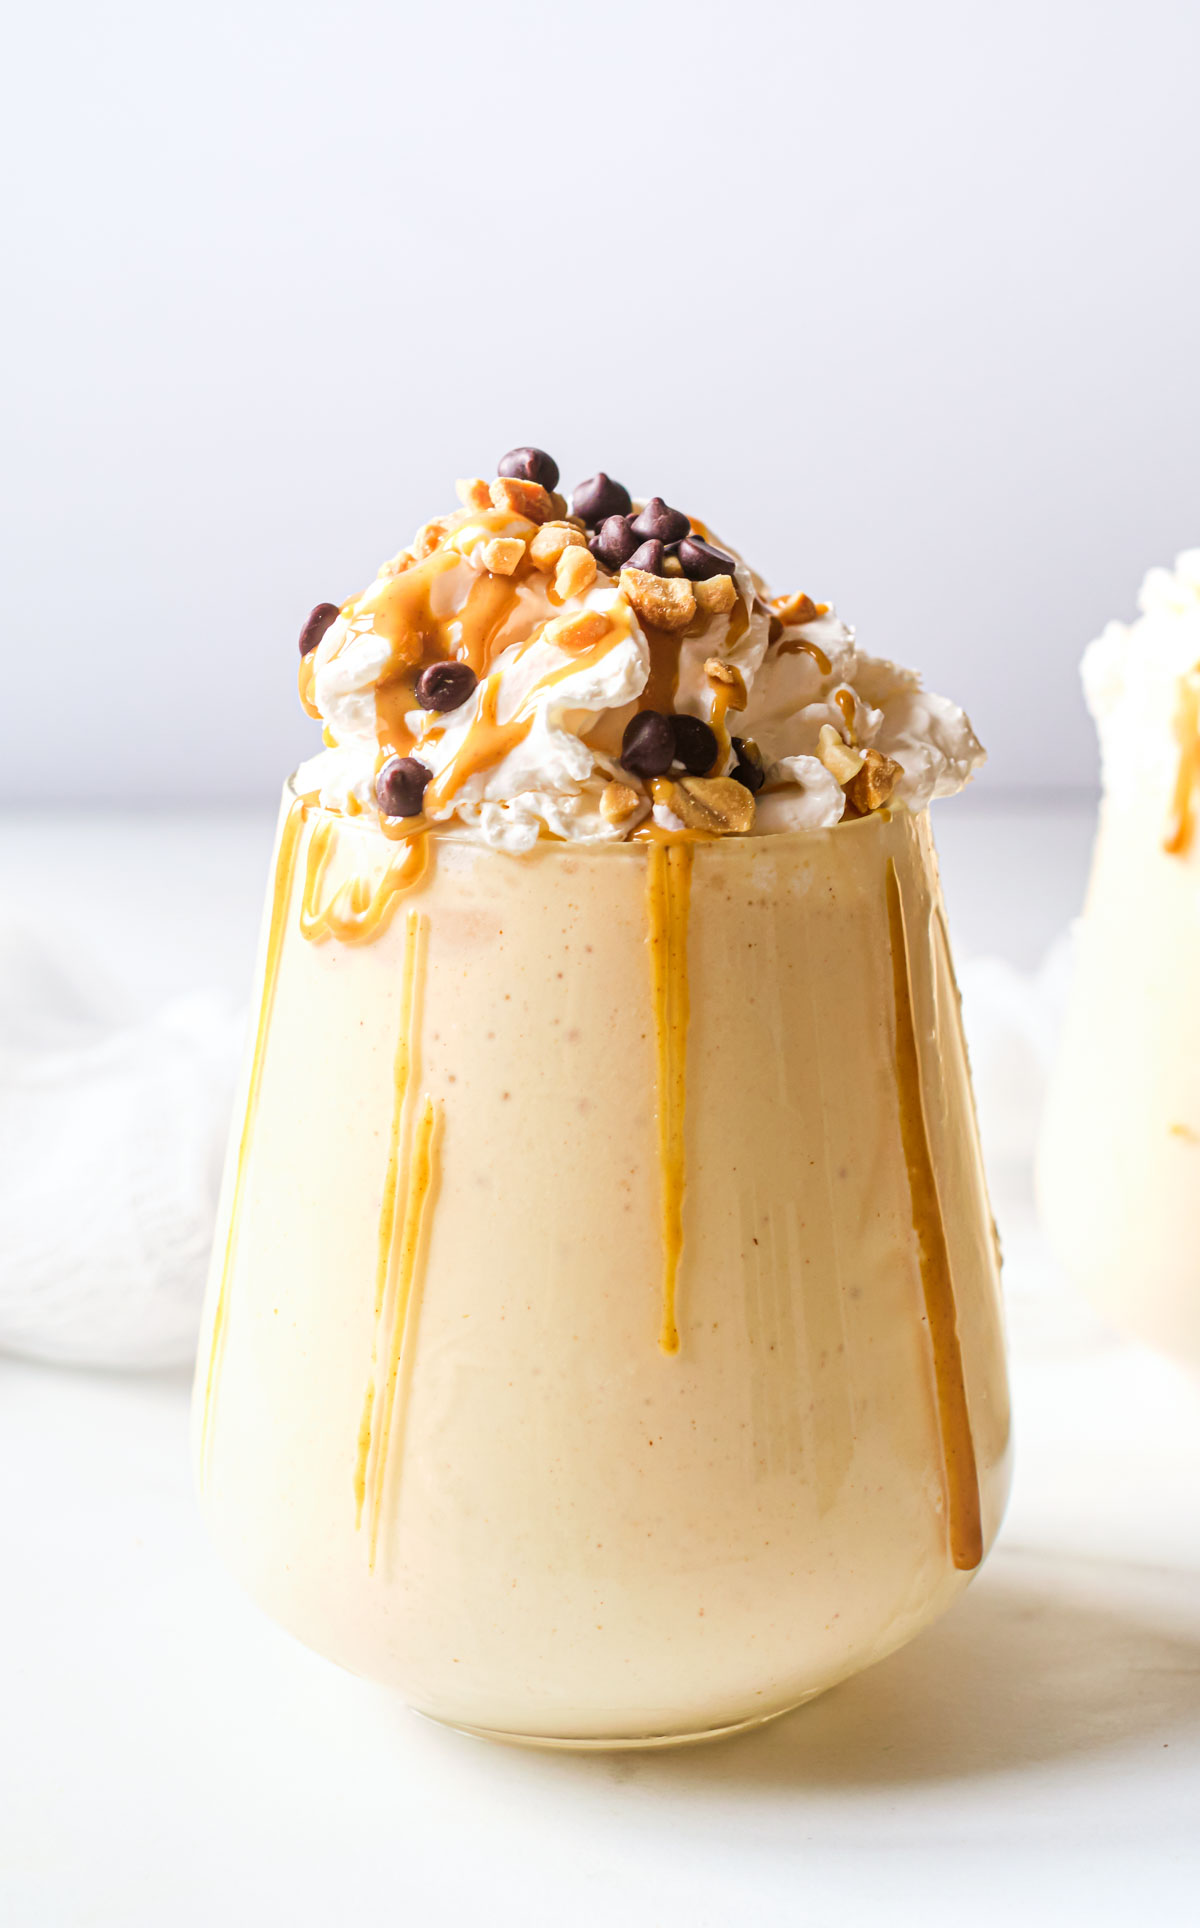 One indulgent peanut butter and cookie milkshake on a table with cream, chocolate chips, peanuts and caramel sauce